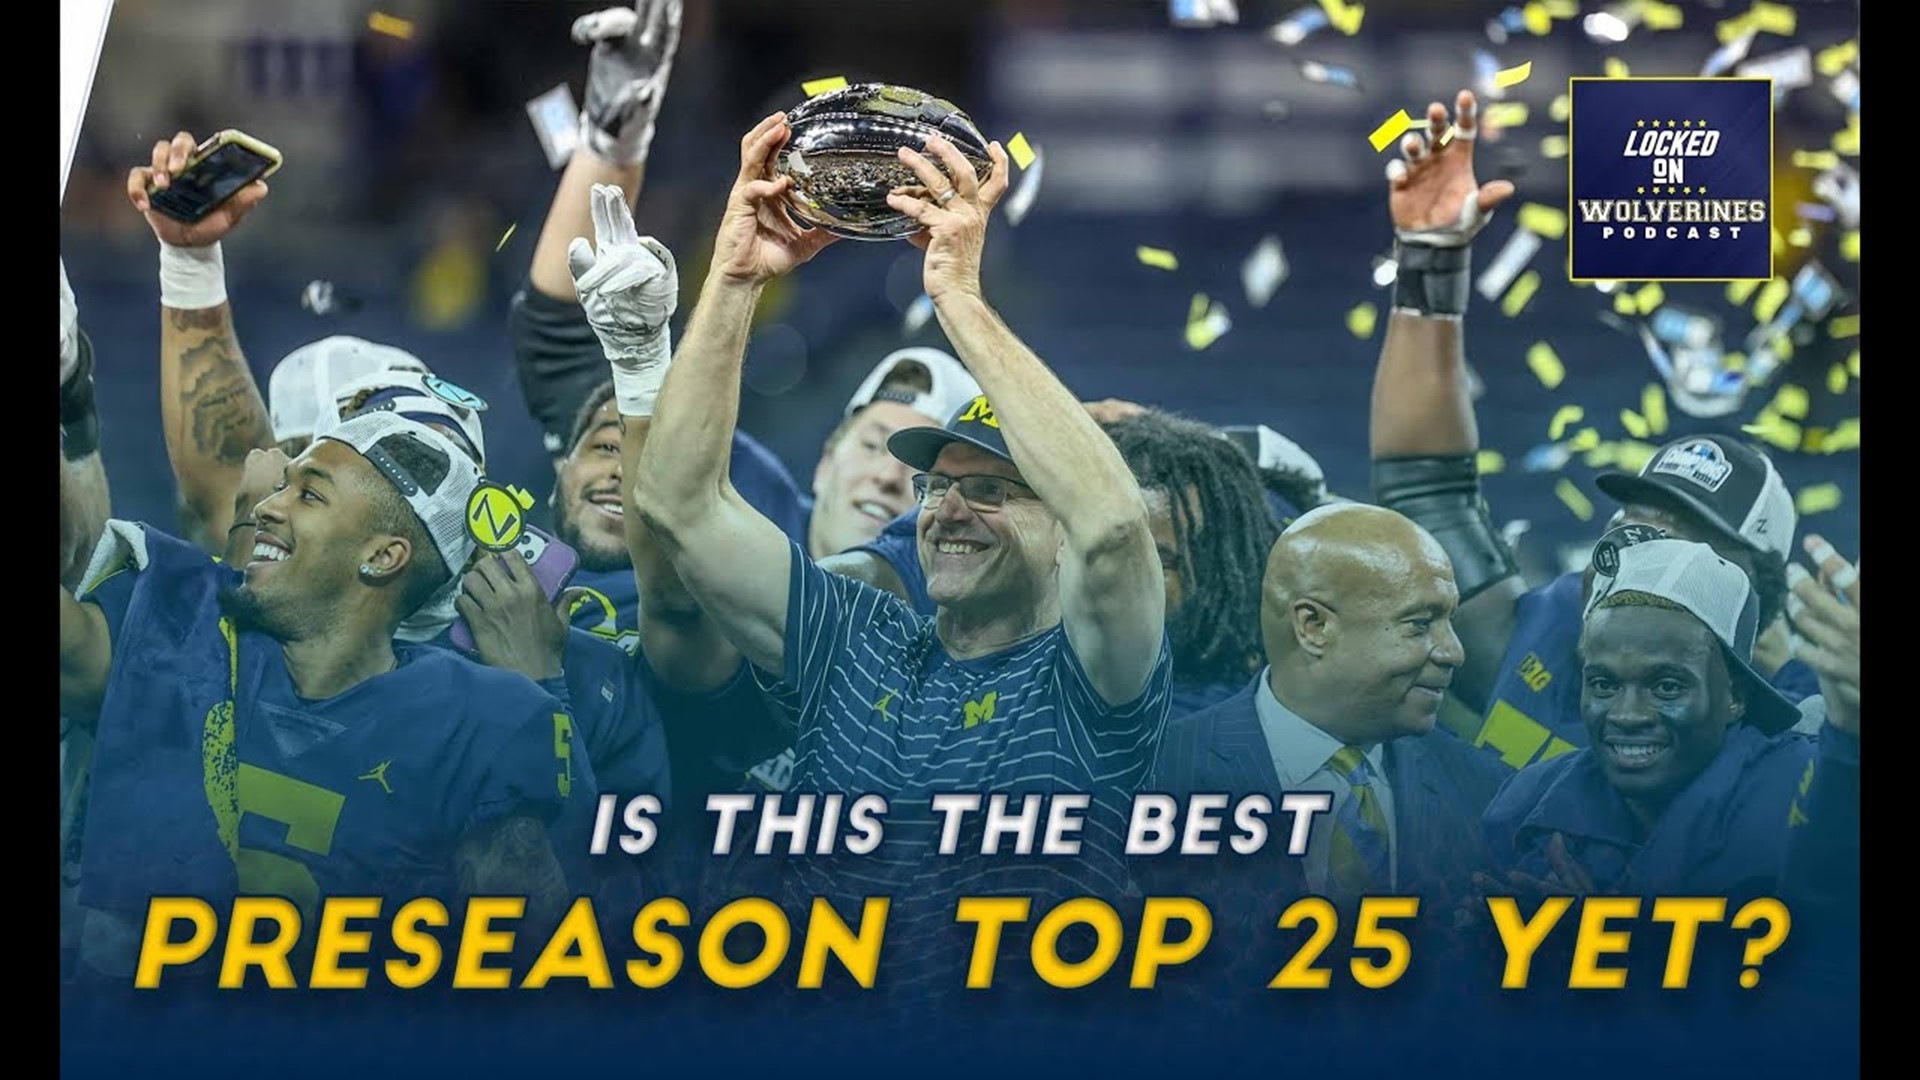 Did USA TODAY Sports actually get the preseason top 25 right?